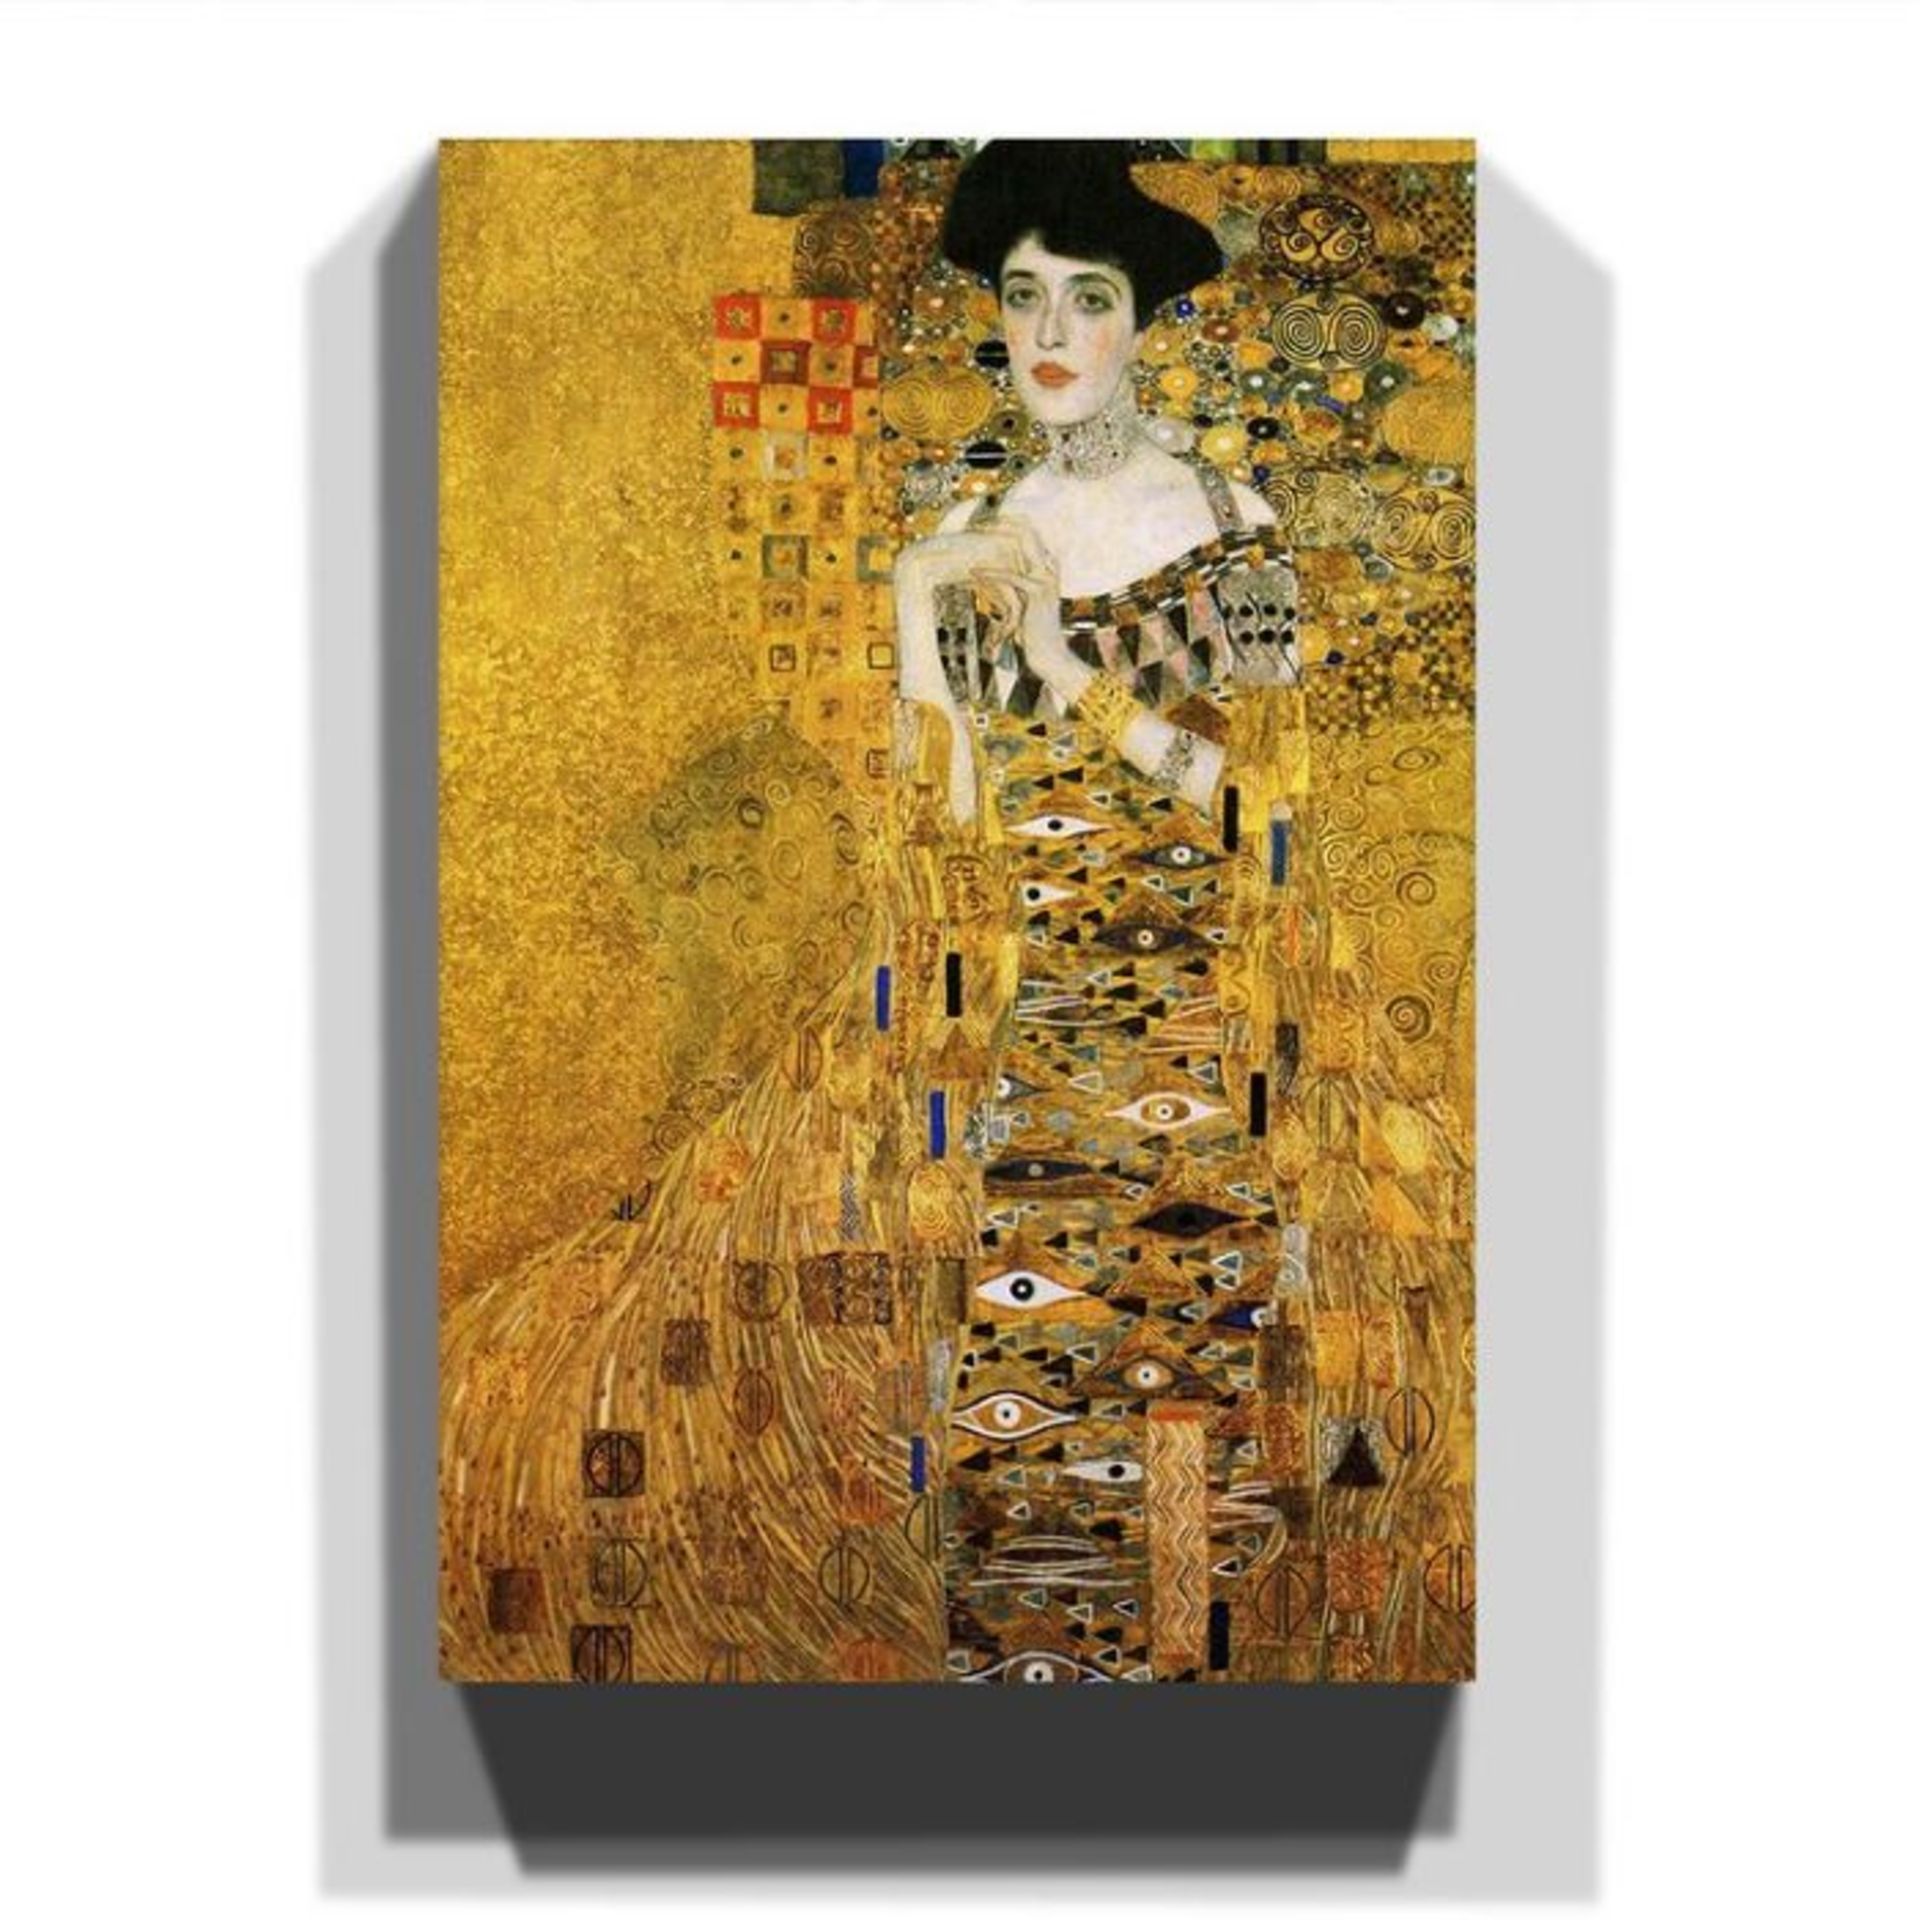 Portrait of Adele Bloch-Bauer 2' by Gustav Klimt - Wrapped Canvas Painting Print (ORANGE) RRP - £ - Image 3 of 4